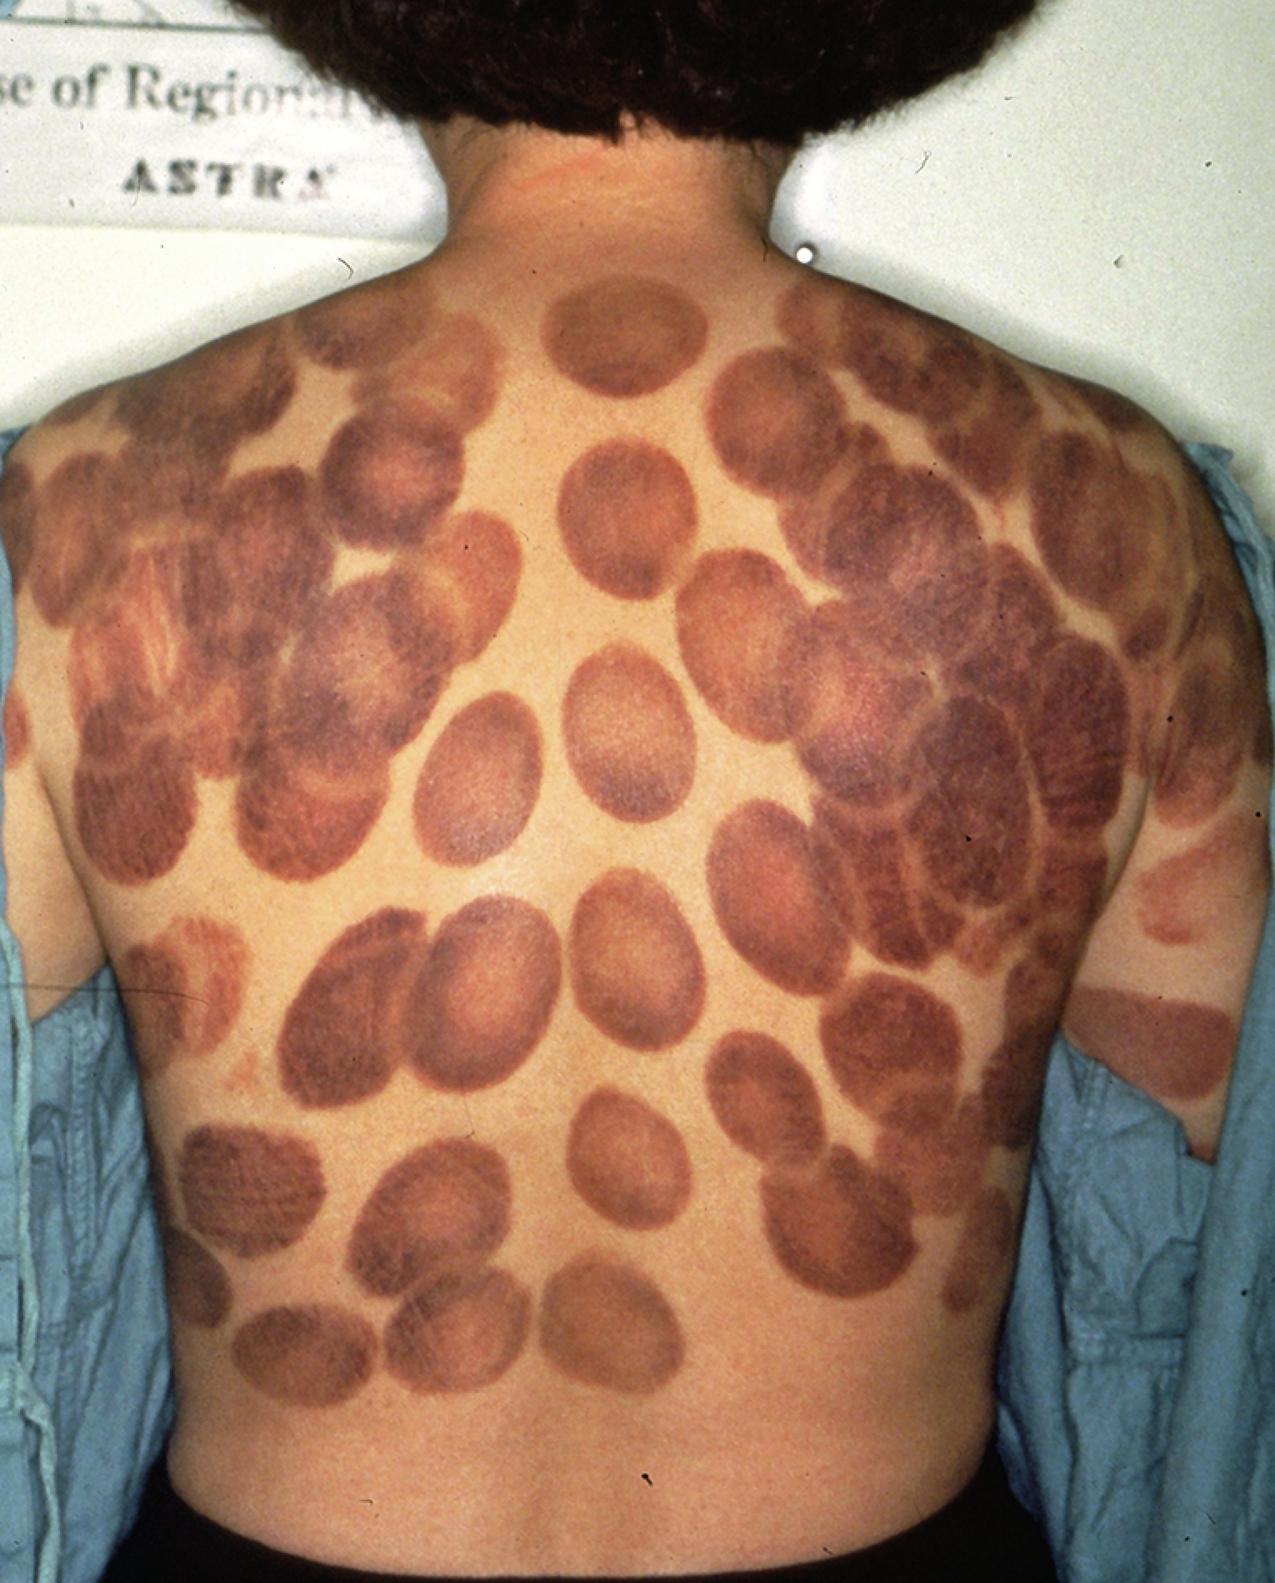 Fig. 64.1, Chinese woman with numerous sharply demarcated hemorrhagic lesions of the back due to cupping therapy.